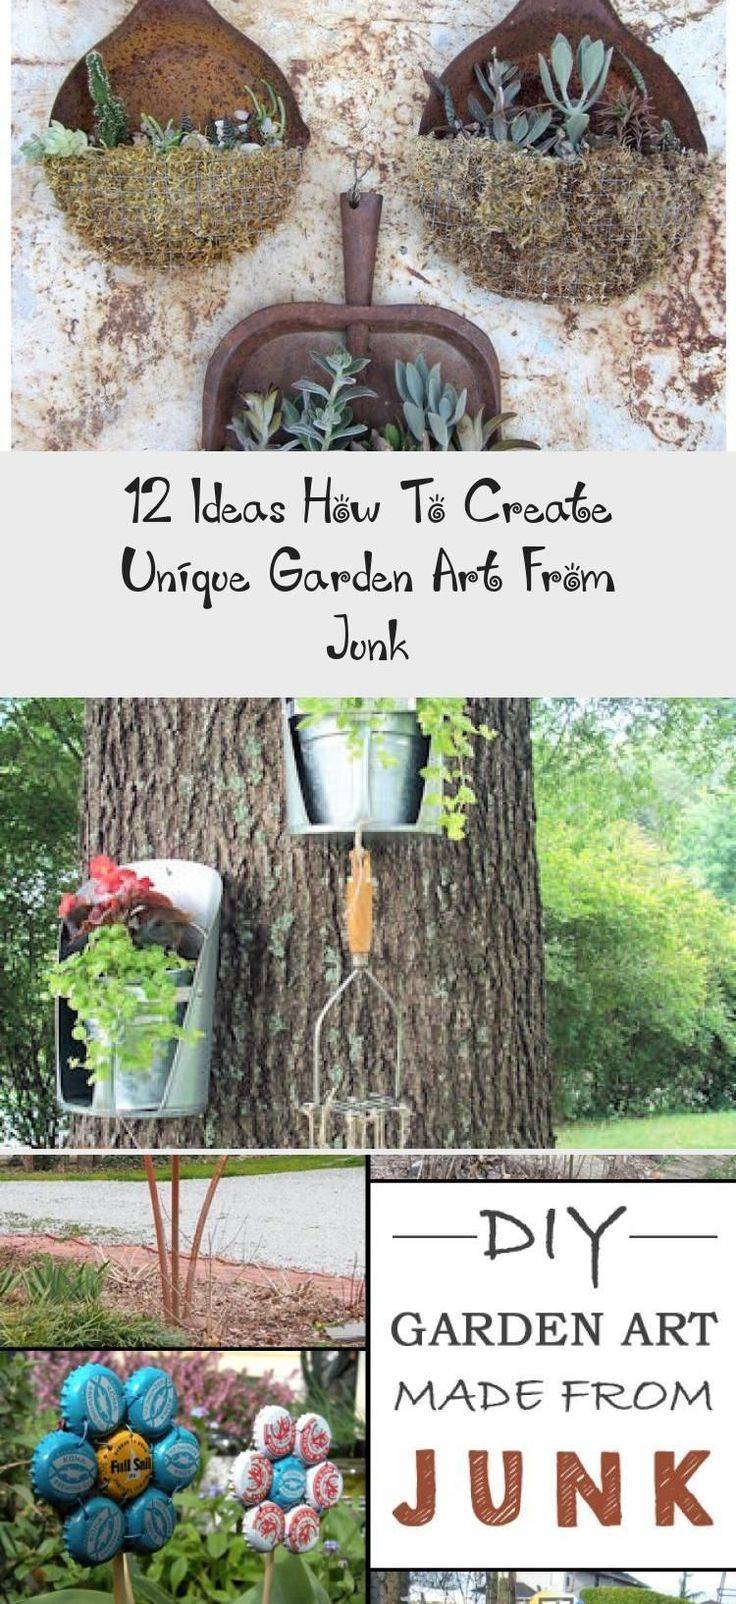 Charming Recycled Garden Junk Ideas